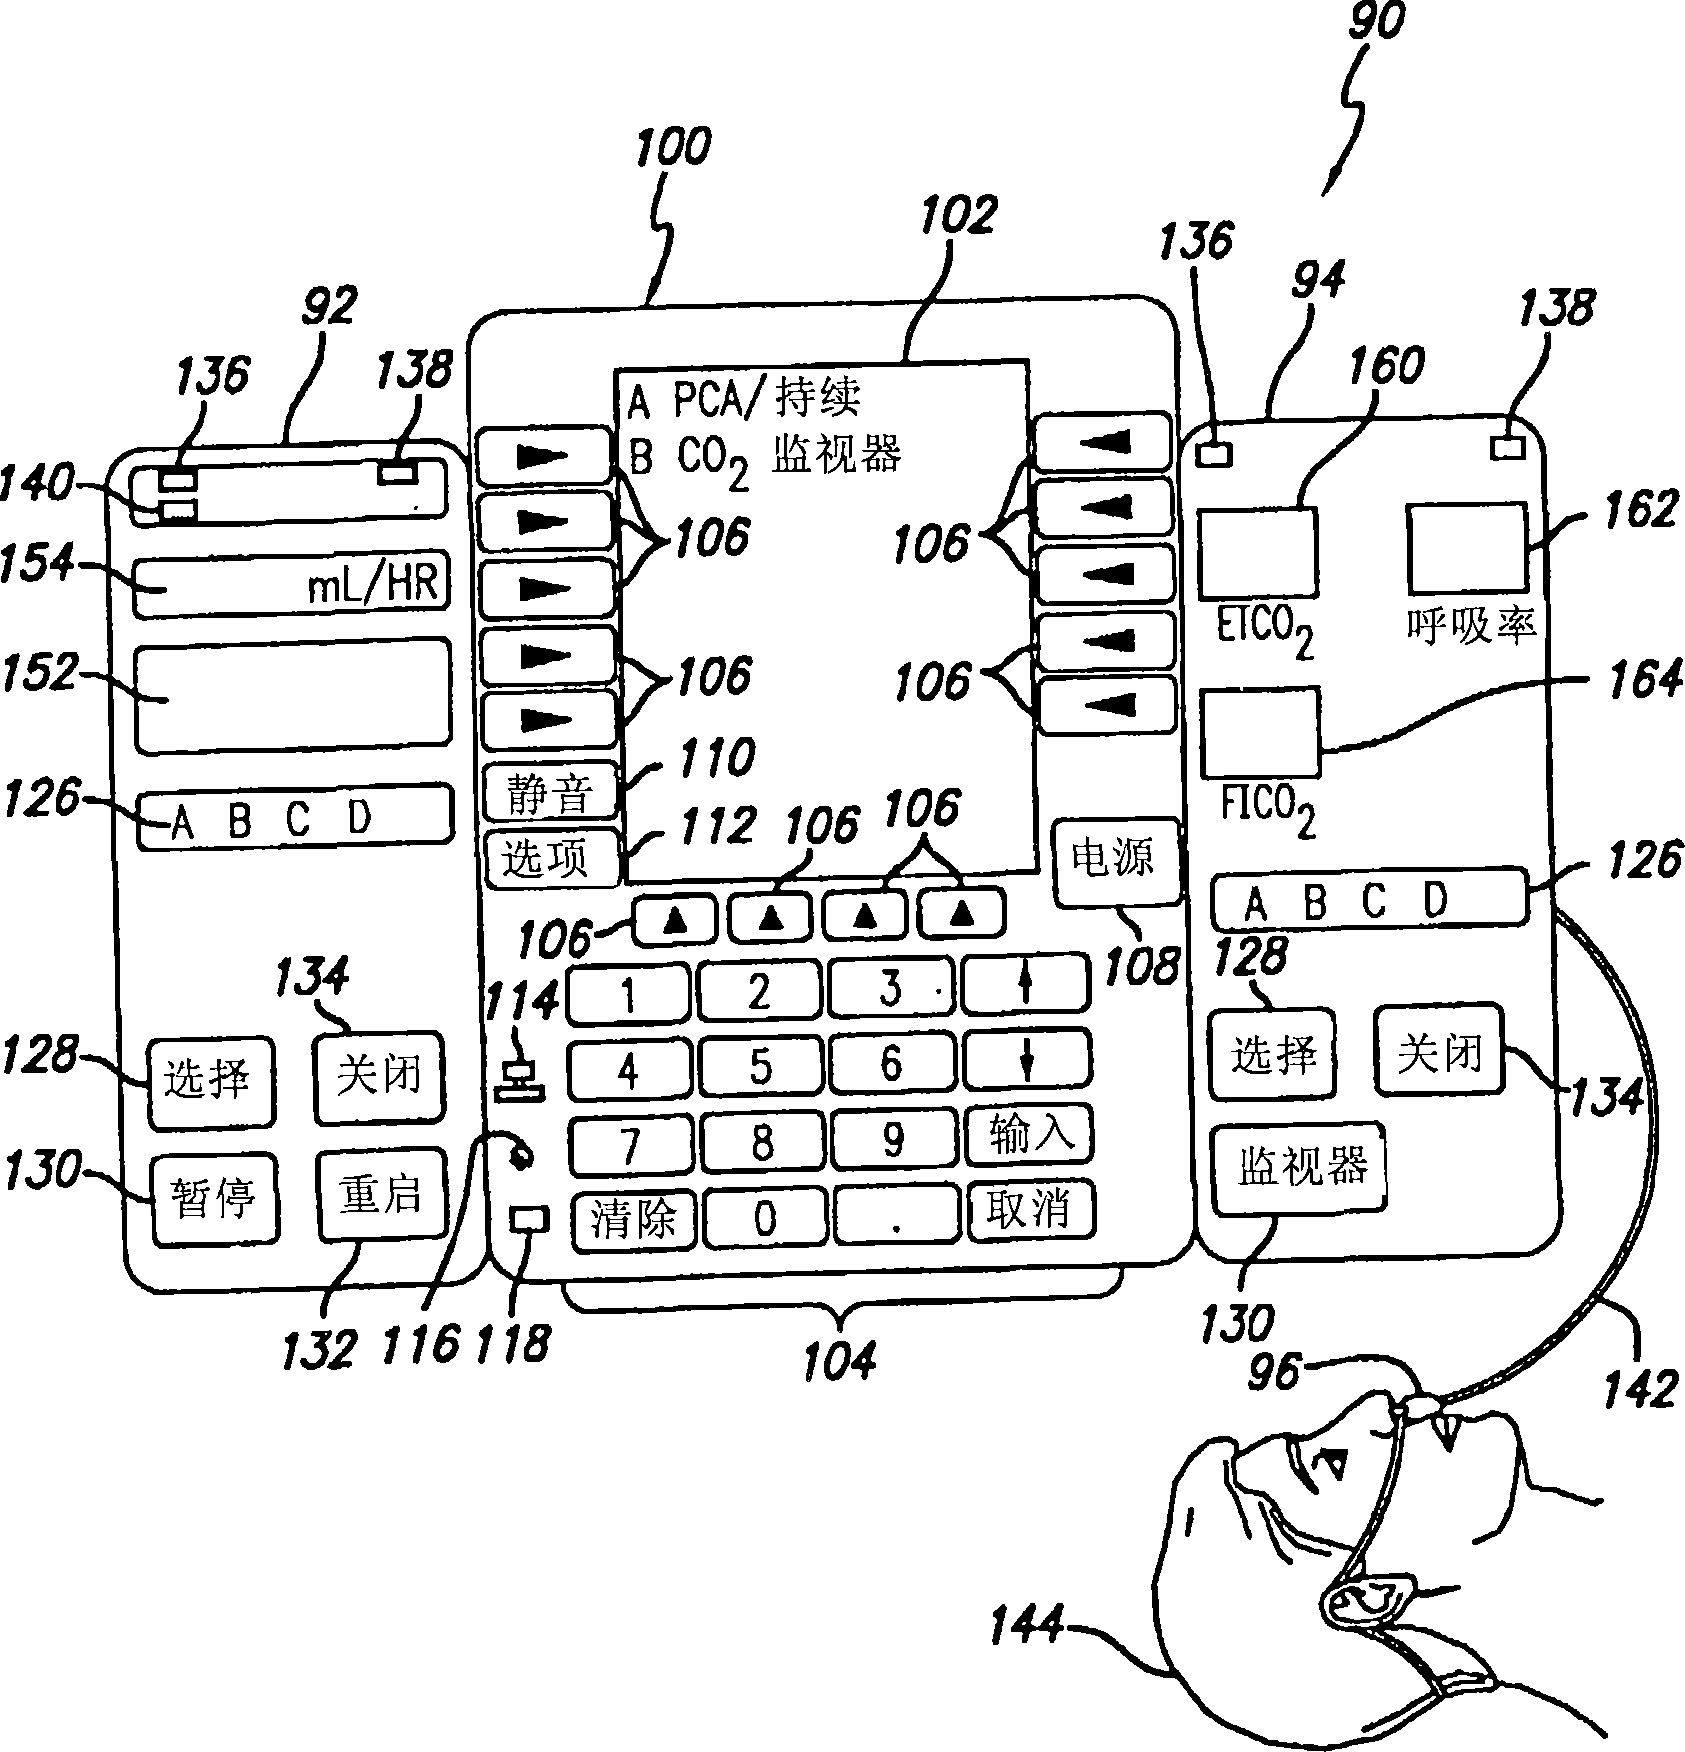 Patient-controlled analgesia with patient monitoring system and method